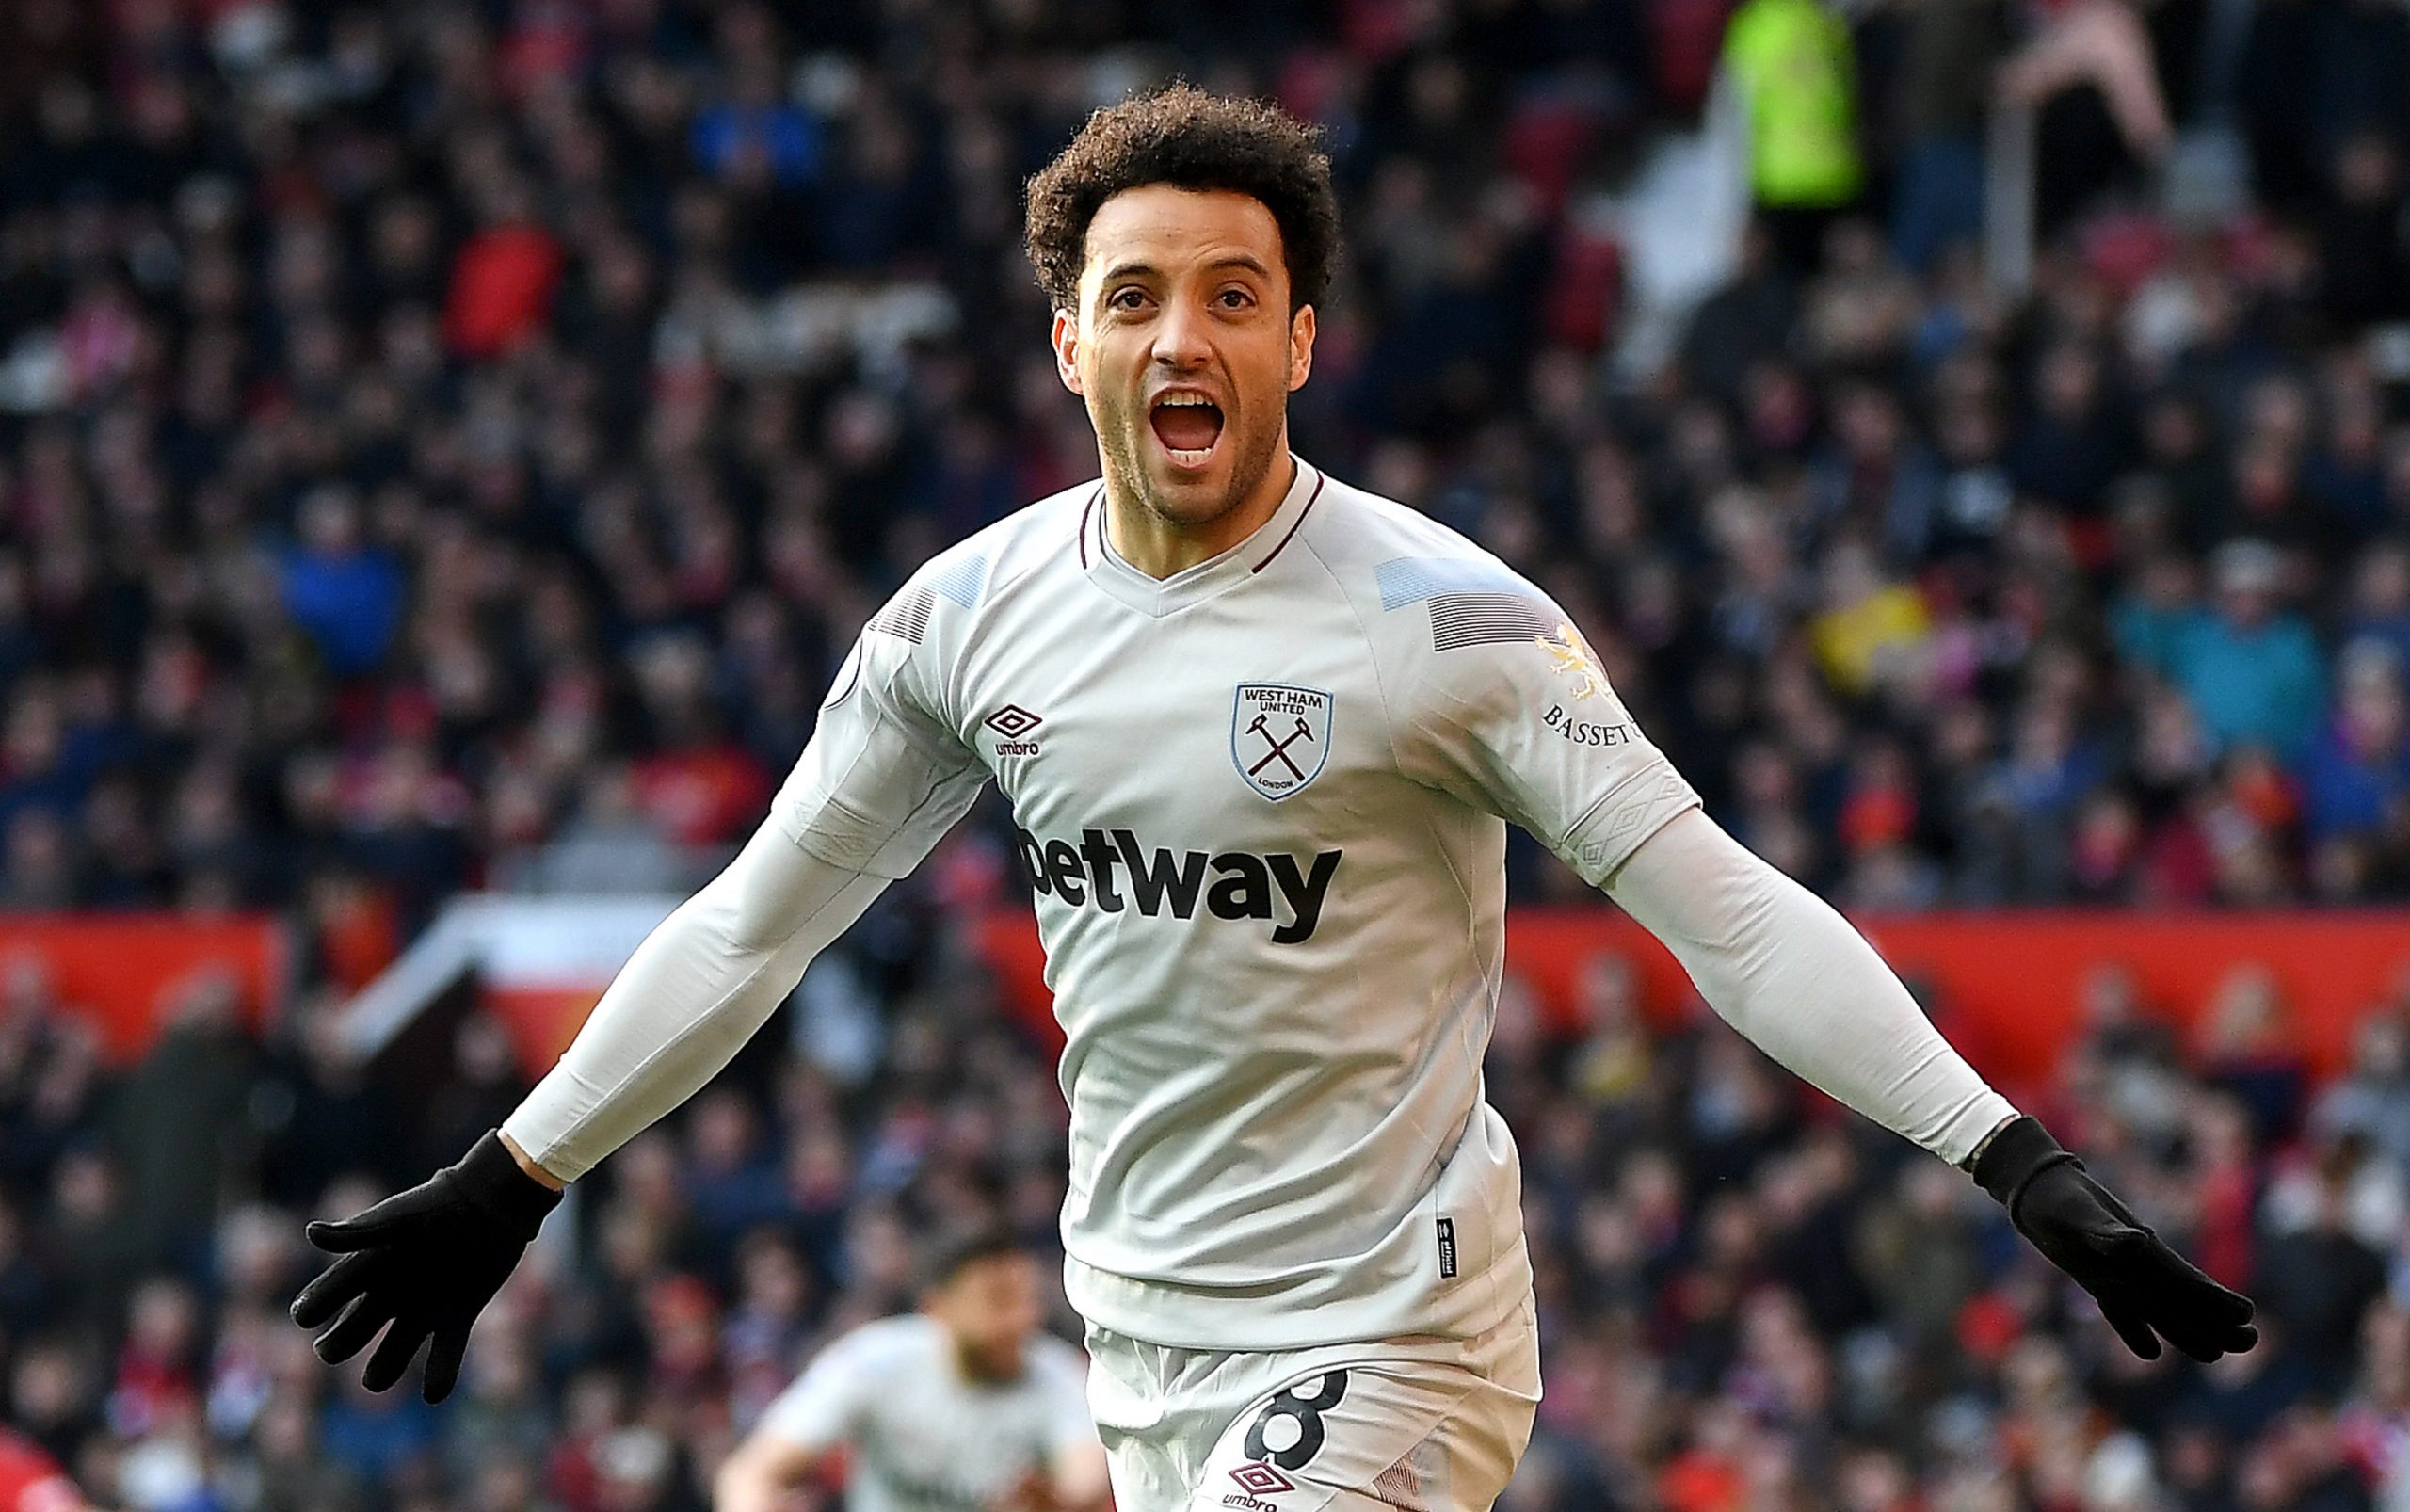 MANCHESTER, ENGLAND - APRIL 13: Felipe Anderson of West Ham United celebrates after scoring his team's first goal during the Premier League match between Manchester United and West Ham United at Old Trafford on April 13, 2019 in Manchester, United Kingdom. (Photo by Gareth Copley/Getty Images)